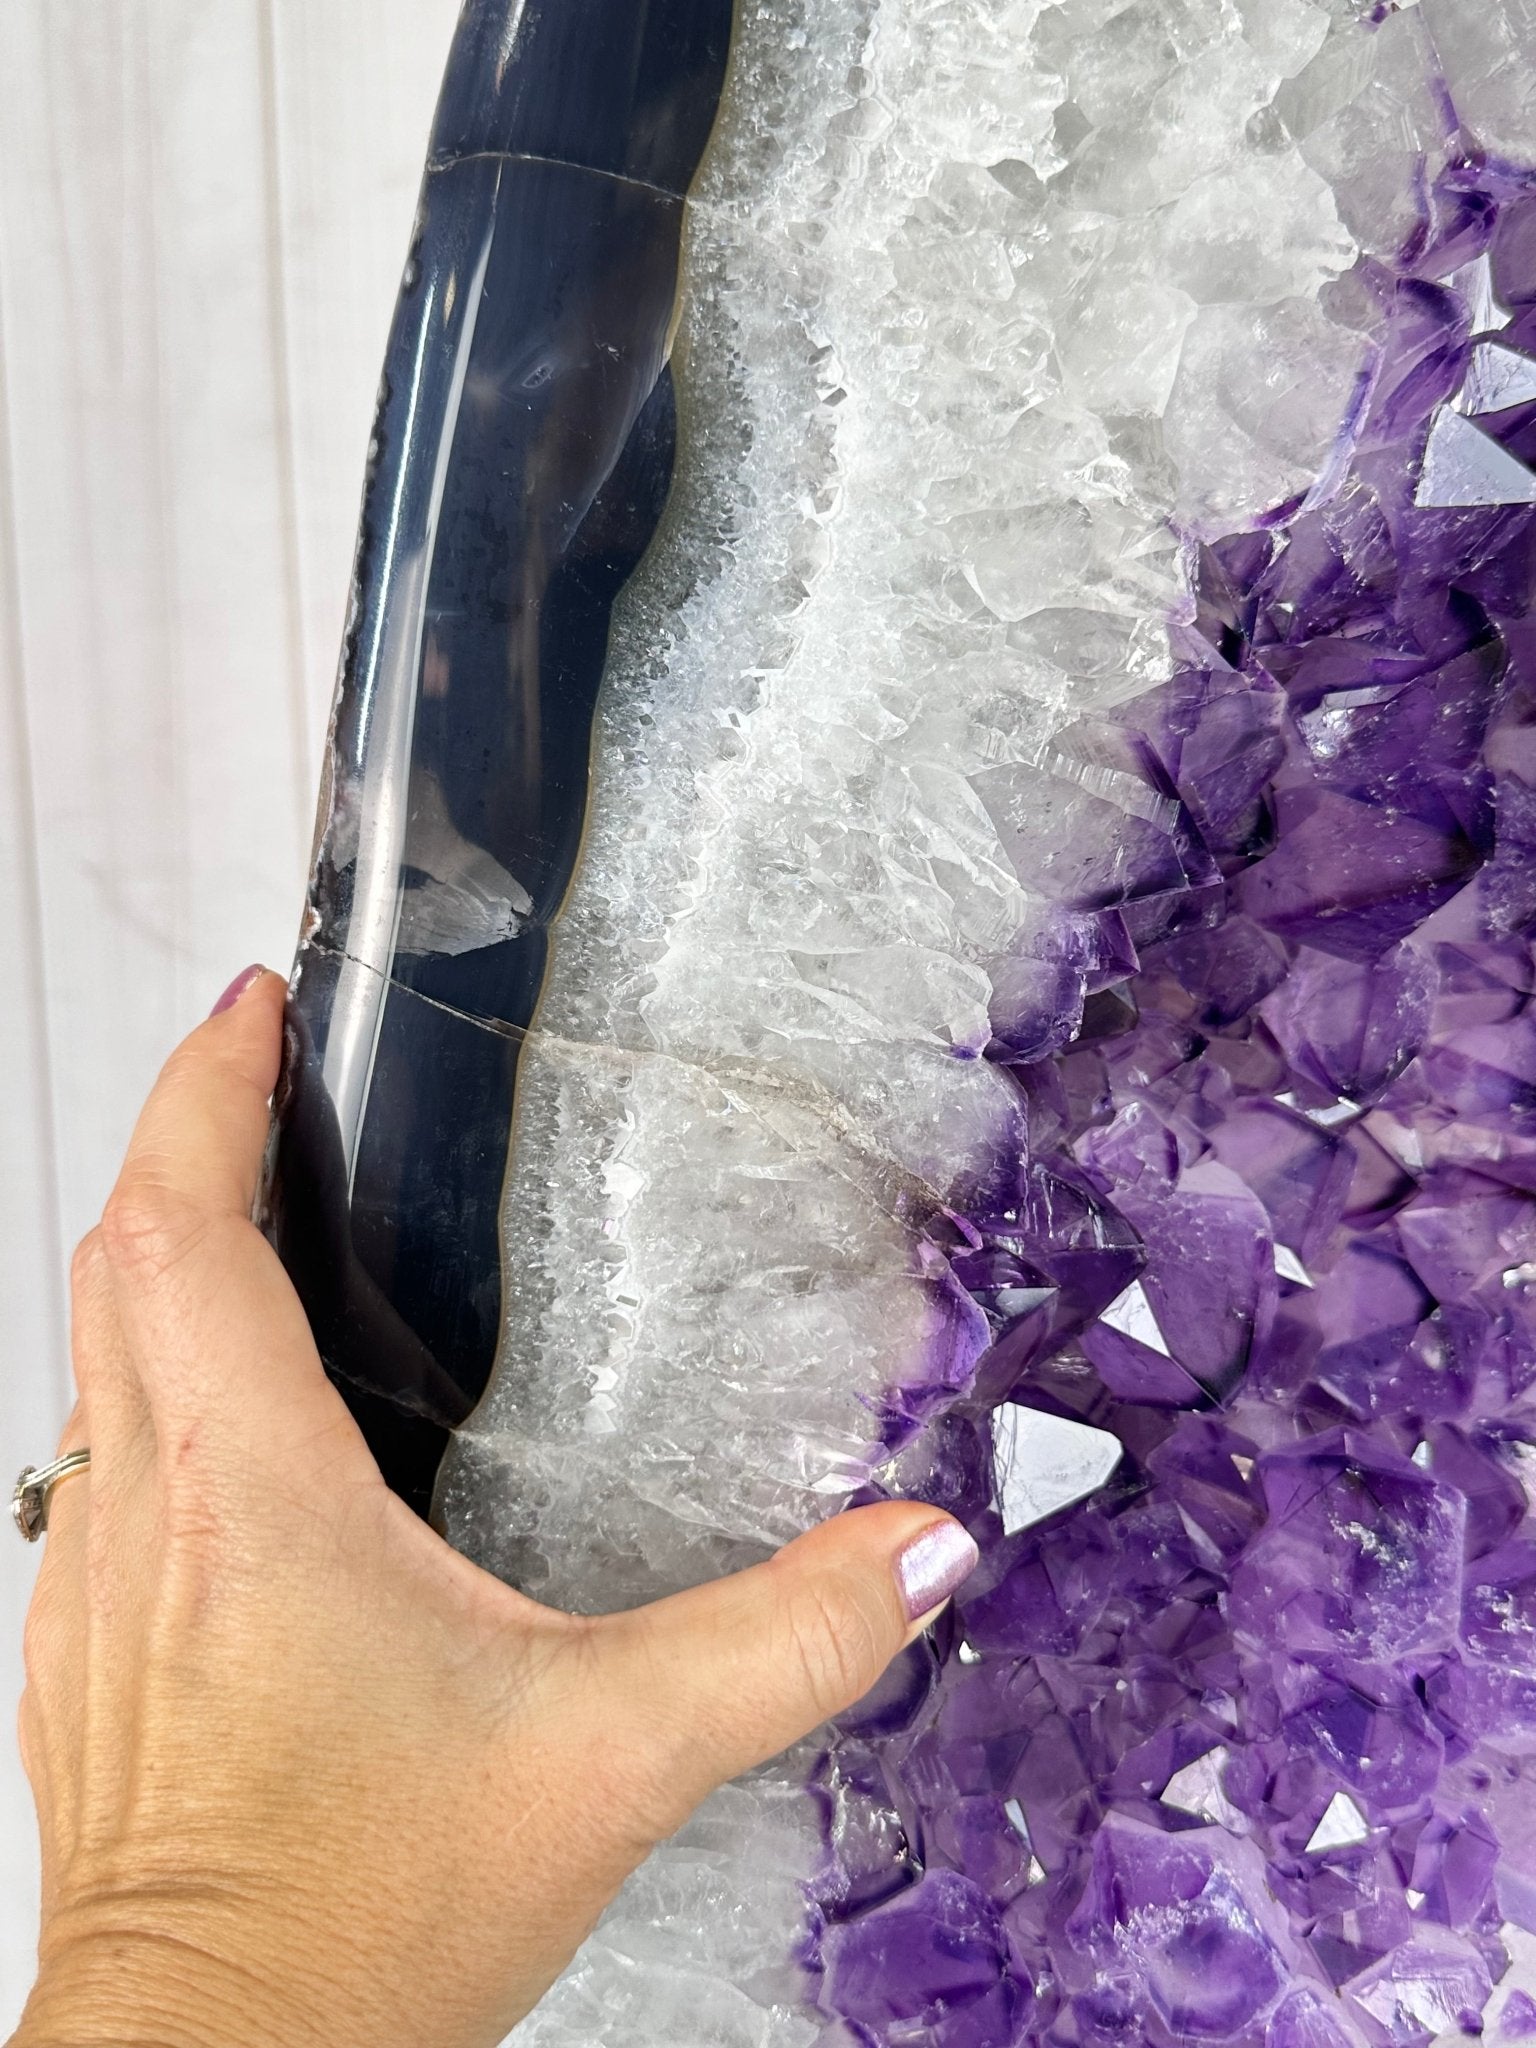 Super Quality Amethyst Slice on Rotating Stand, 194 lbs & 67" Tall #5622AM-002 - Brazil GemsBrazil GemsSuper Quality Amethyst Slice on Rotating Stand, 194 lbs & 67" Tall #5622AM-002Slices on Rotating Bases5622AM-002